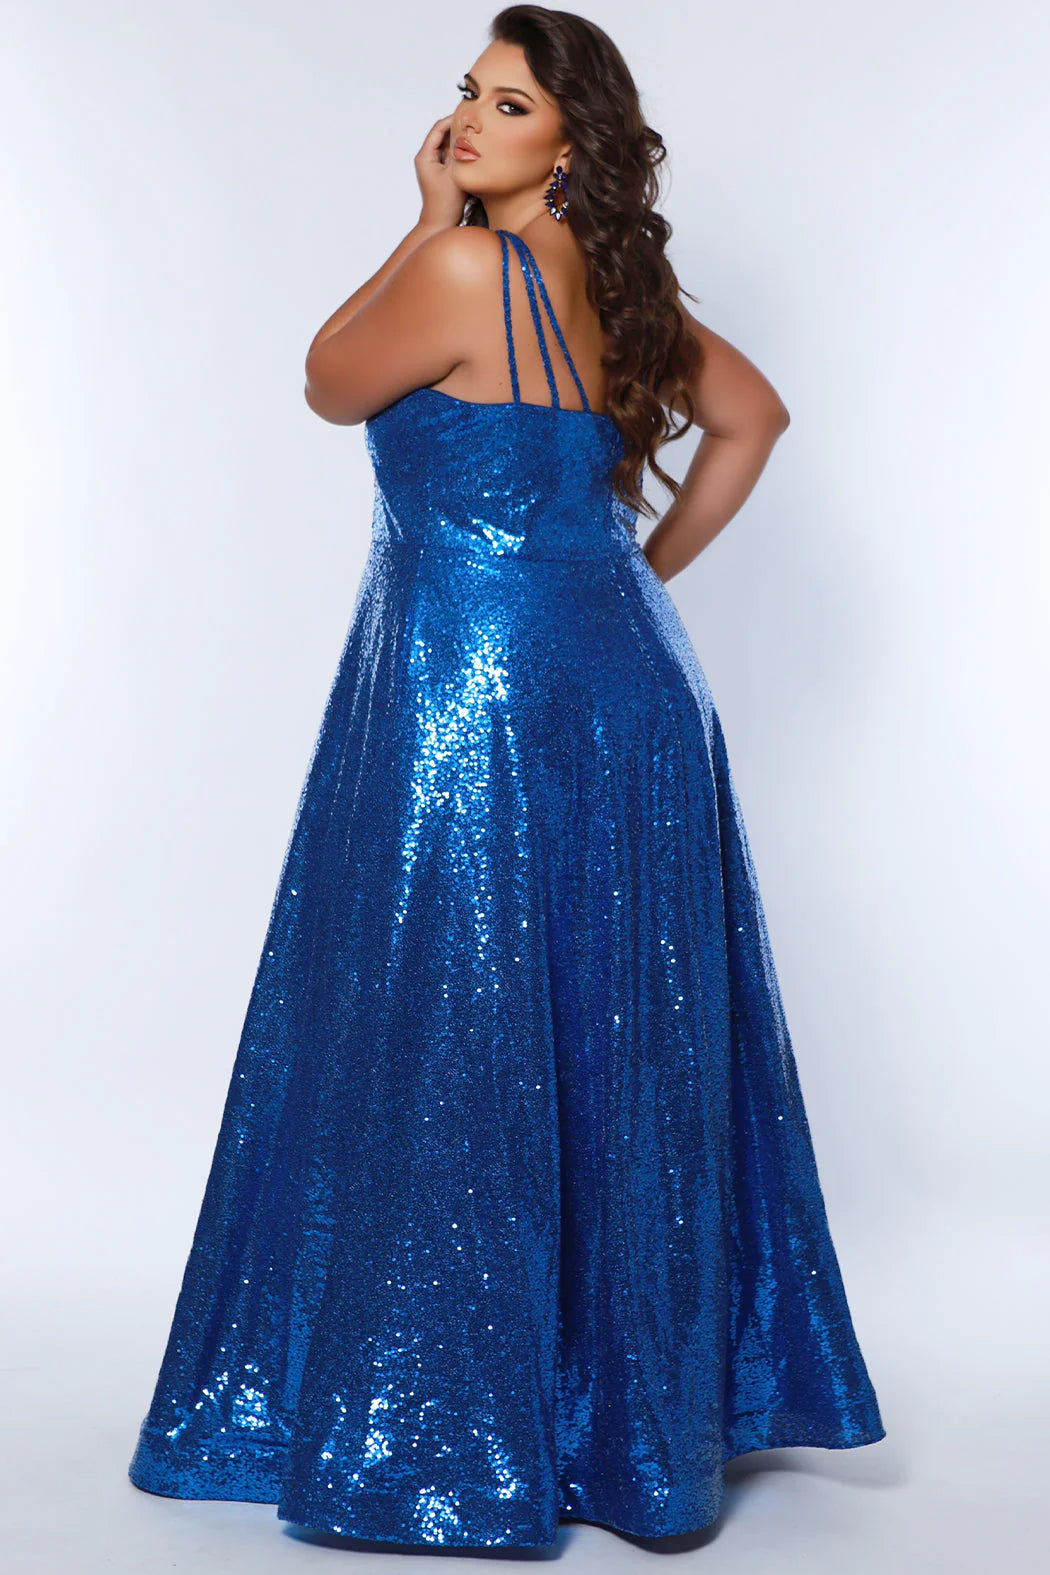 Make a statement in the Sydneys Closet SC7387 Plus Size Sequin A-Line Prom Dress. This beautiful formal gown features beaded sequin detailing, a flattering scoop neckline, and an elegant A-line silhouette. Perfect for prom, pageants, and other special occasions. Sparkle all night long when you wear this long evening gown to Prom or any other formal event on your social calendar that calls for the glamour of overall sequins.